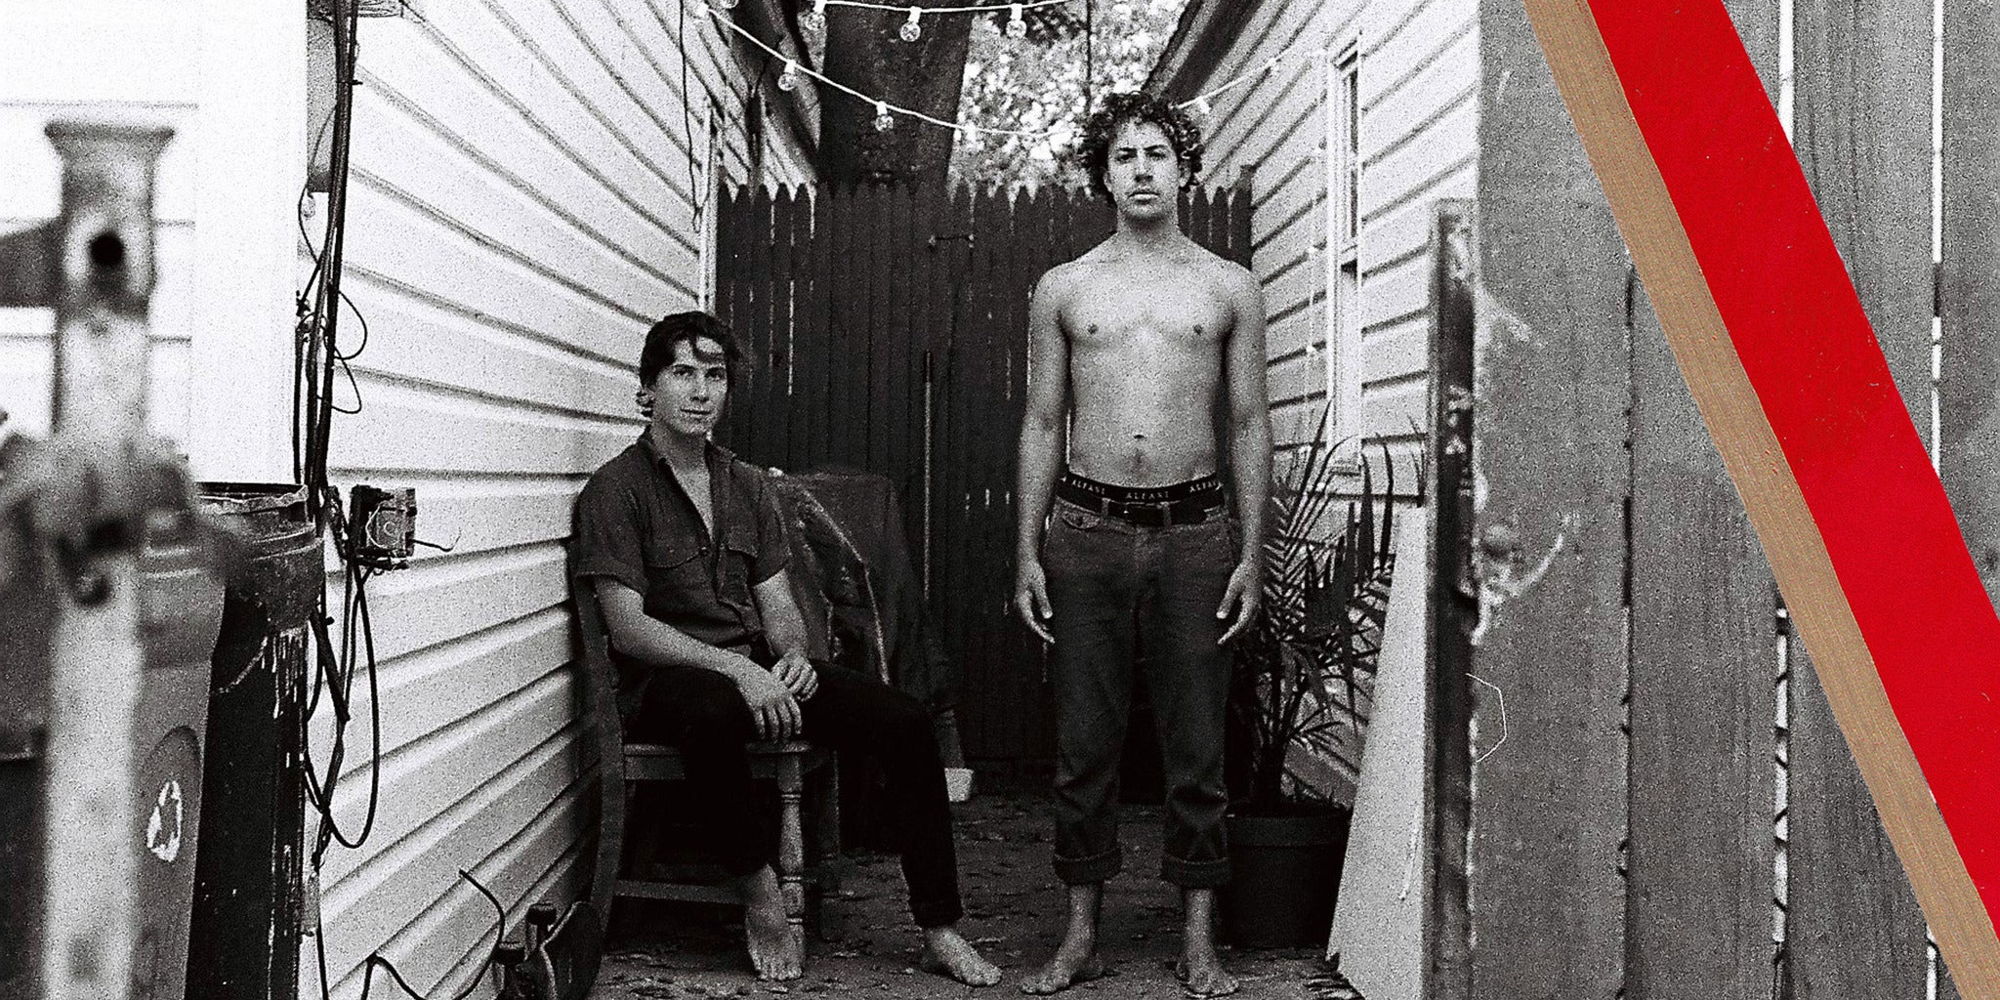 Lewis Del Mar w/ Mobley at The Parish 9/26 promotional image